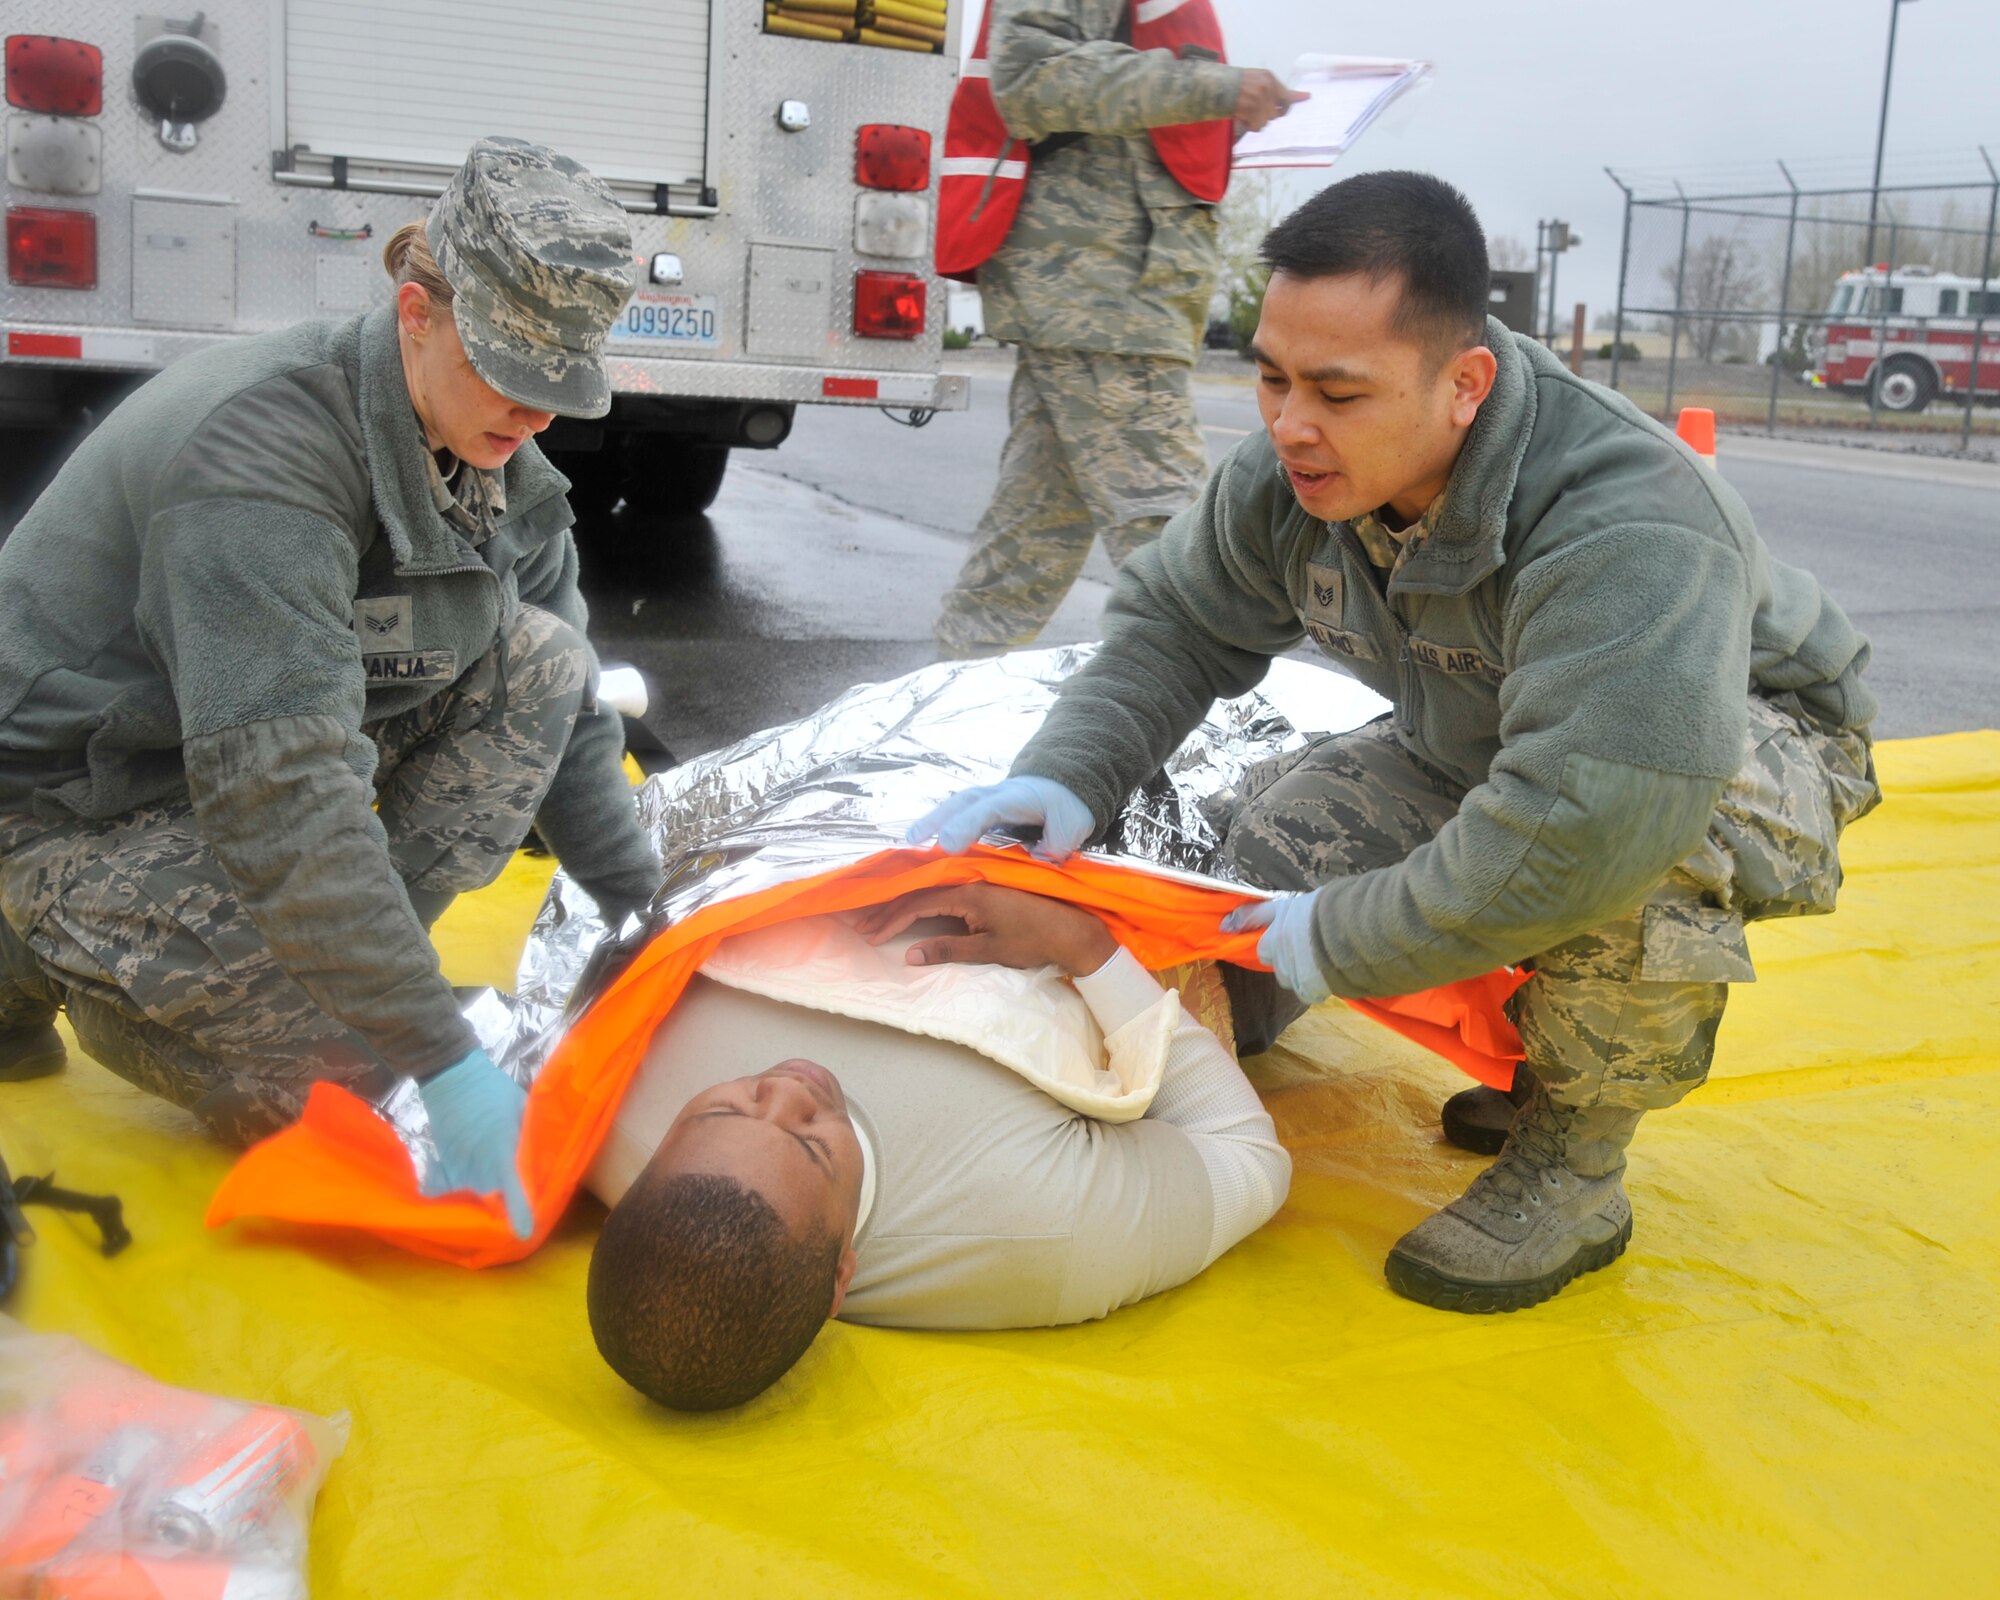 Members of Team Fairchild transport a simulated patient during an exercise at Fairchild Air Force Base, Wash., April 22, 2014. The installation's emergency responders worked alongside partnering agencies from around the community to ensure seamless operations, especially during a crisis. This exercise was held in preparation for the upcoming Skyfest open house and air show. (U.S. Air Force photo by Senior Airman Mary O'Dell/Released)